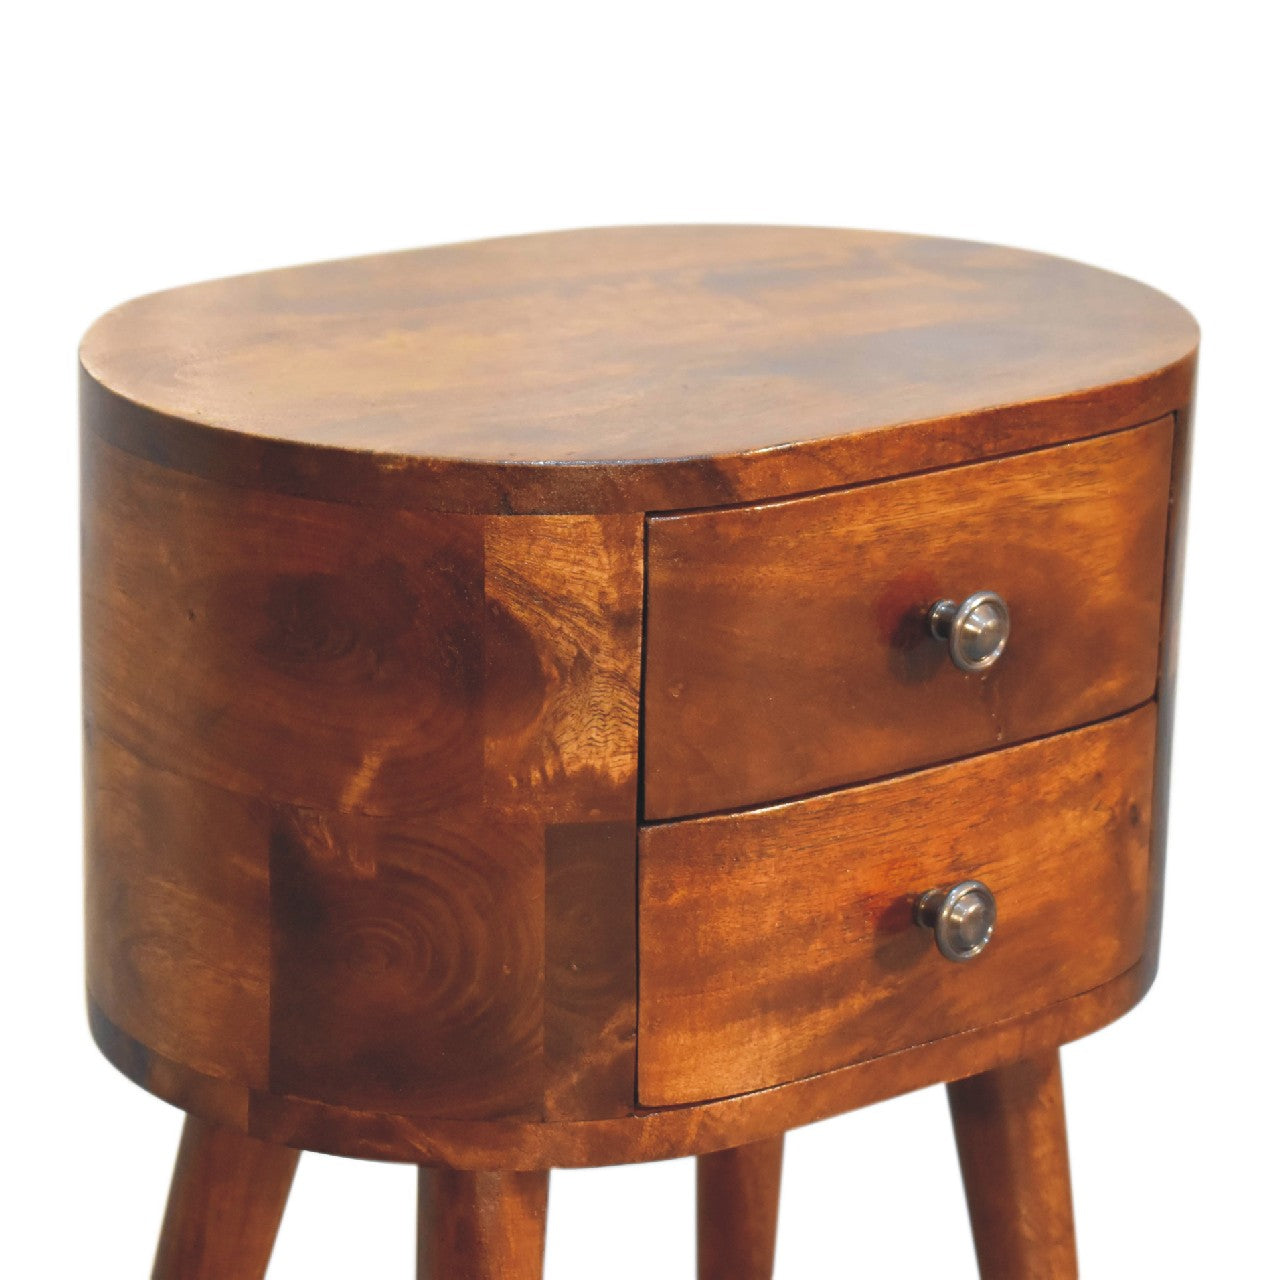 Mini Chestnut Rounded Bedside Table